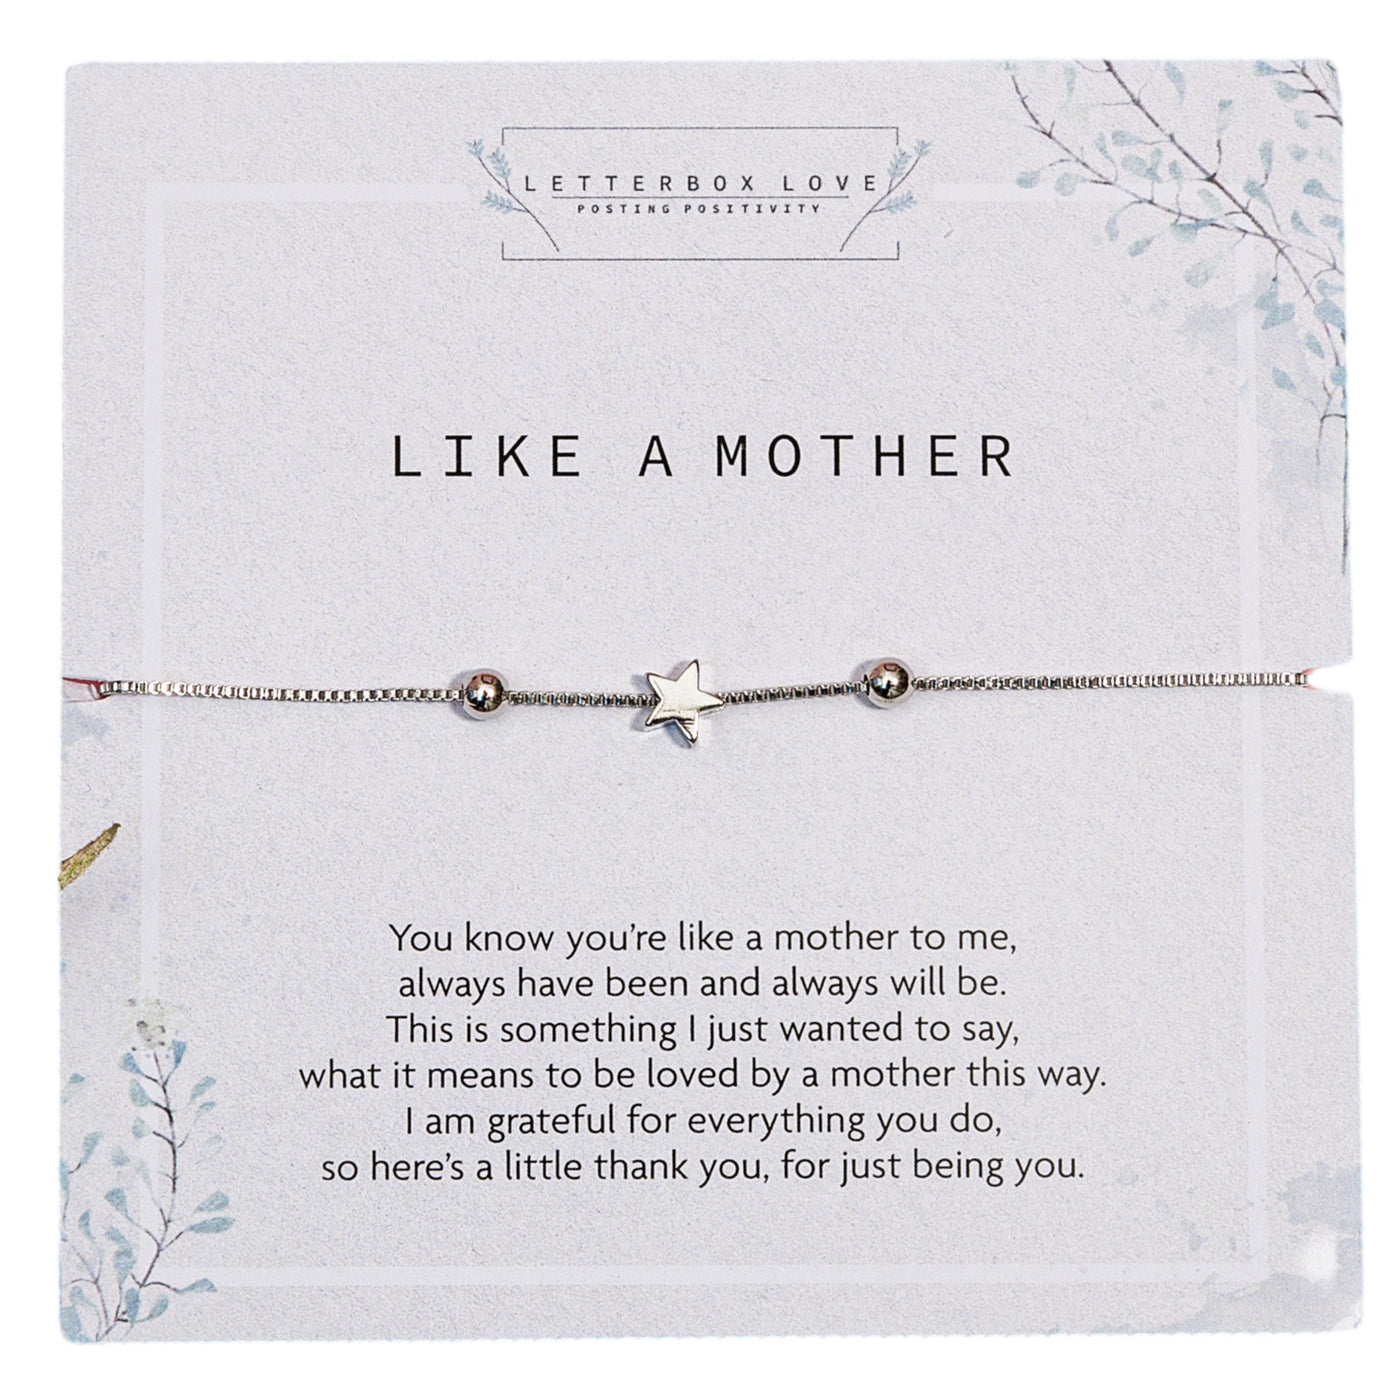 A silver bracelet with a central star charm and two small spherical beads presented on a card with the title 'LIKE A MOTHER' in bold letters. Below the bracelet, a heartfelt poem expresses gratitude and love to a motherly figure. The card's background is white with delicate, grey botanical illustrations,